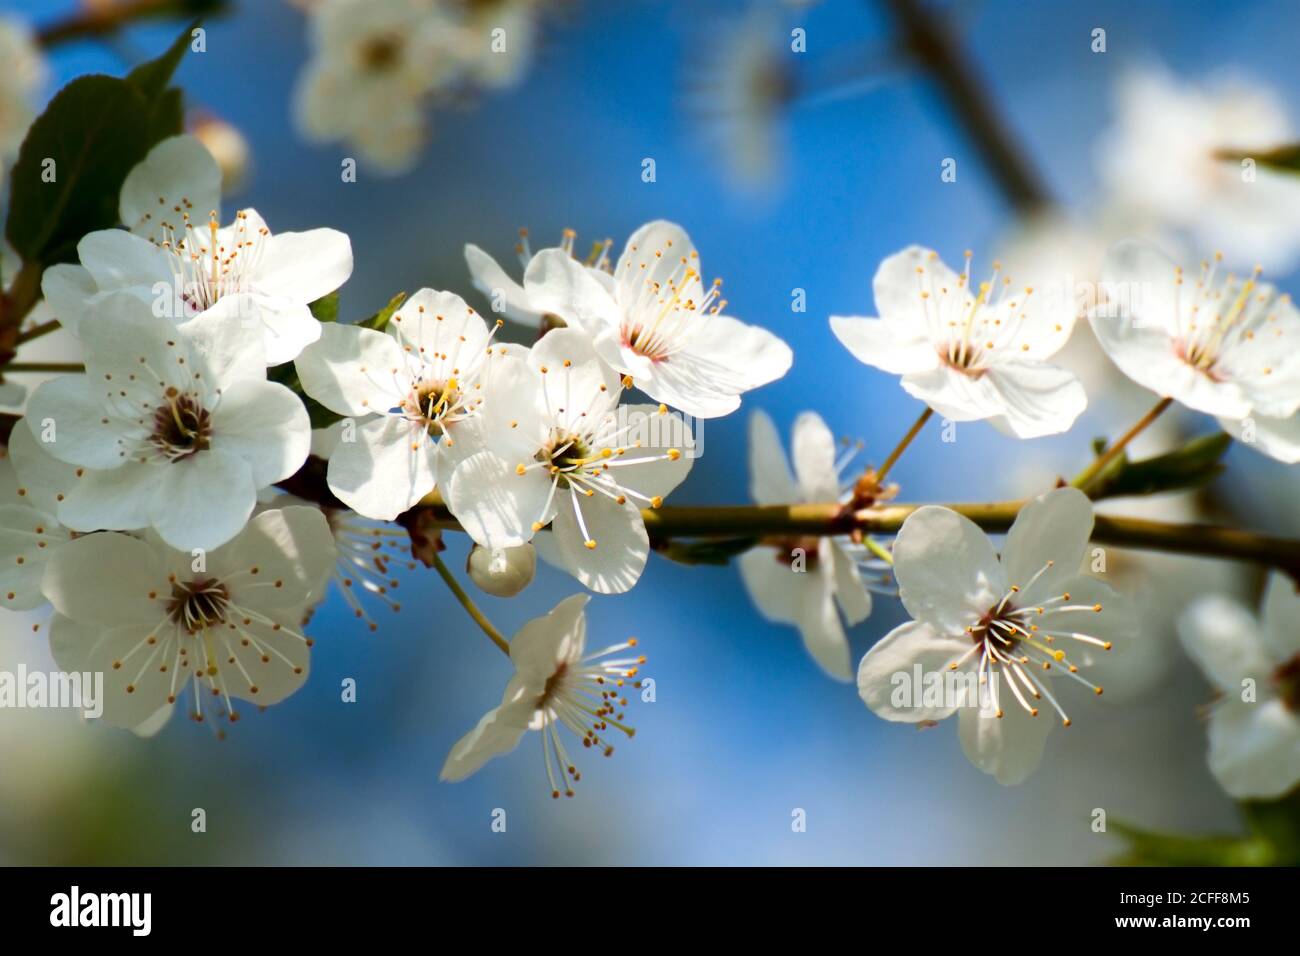 Spring blooming white cherry flowers branch Stock Photo